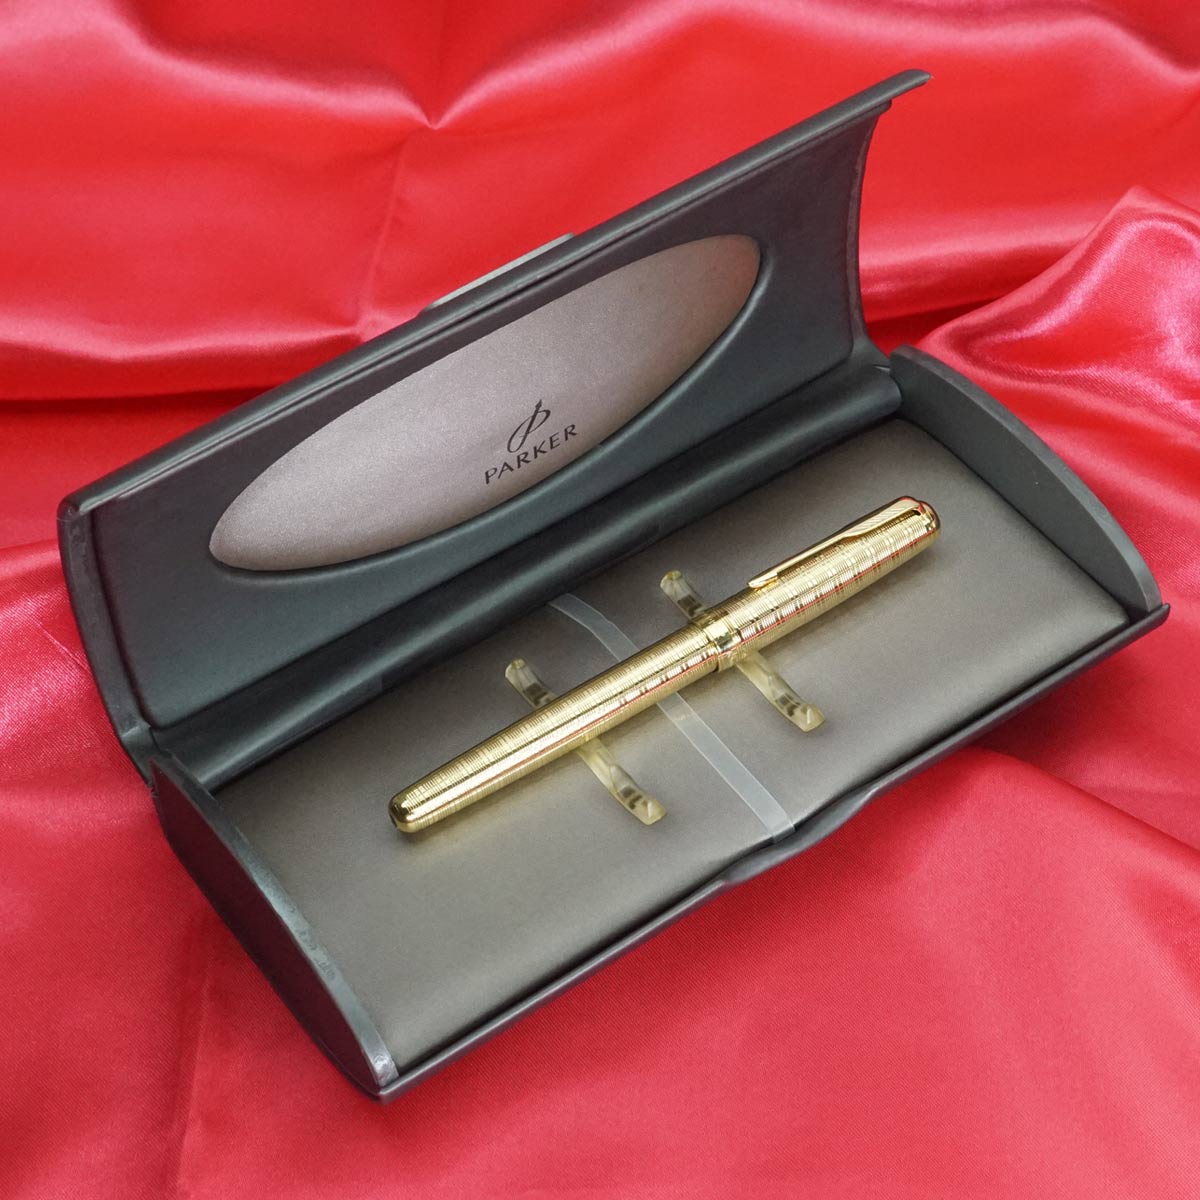 Parker Sonnet Gold Stripped Body and Cap Gold Trims Converter Type Fountain Pen SKU 21485